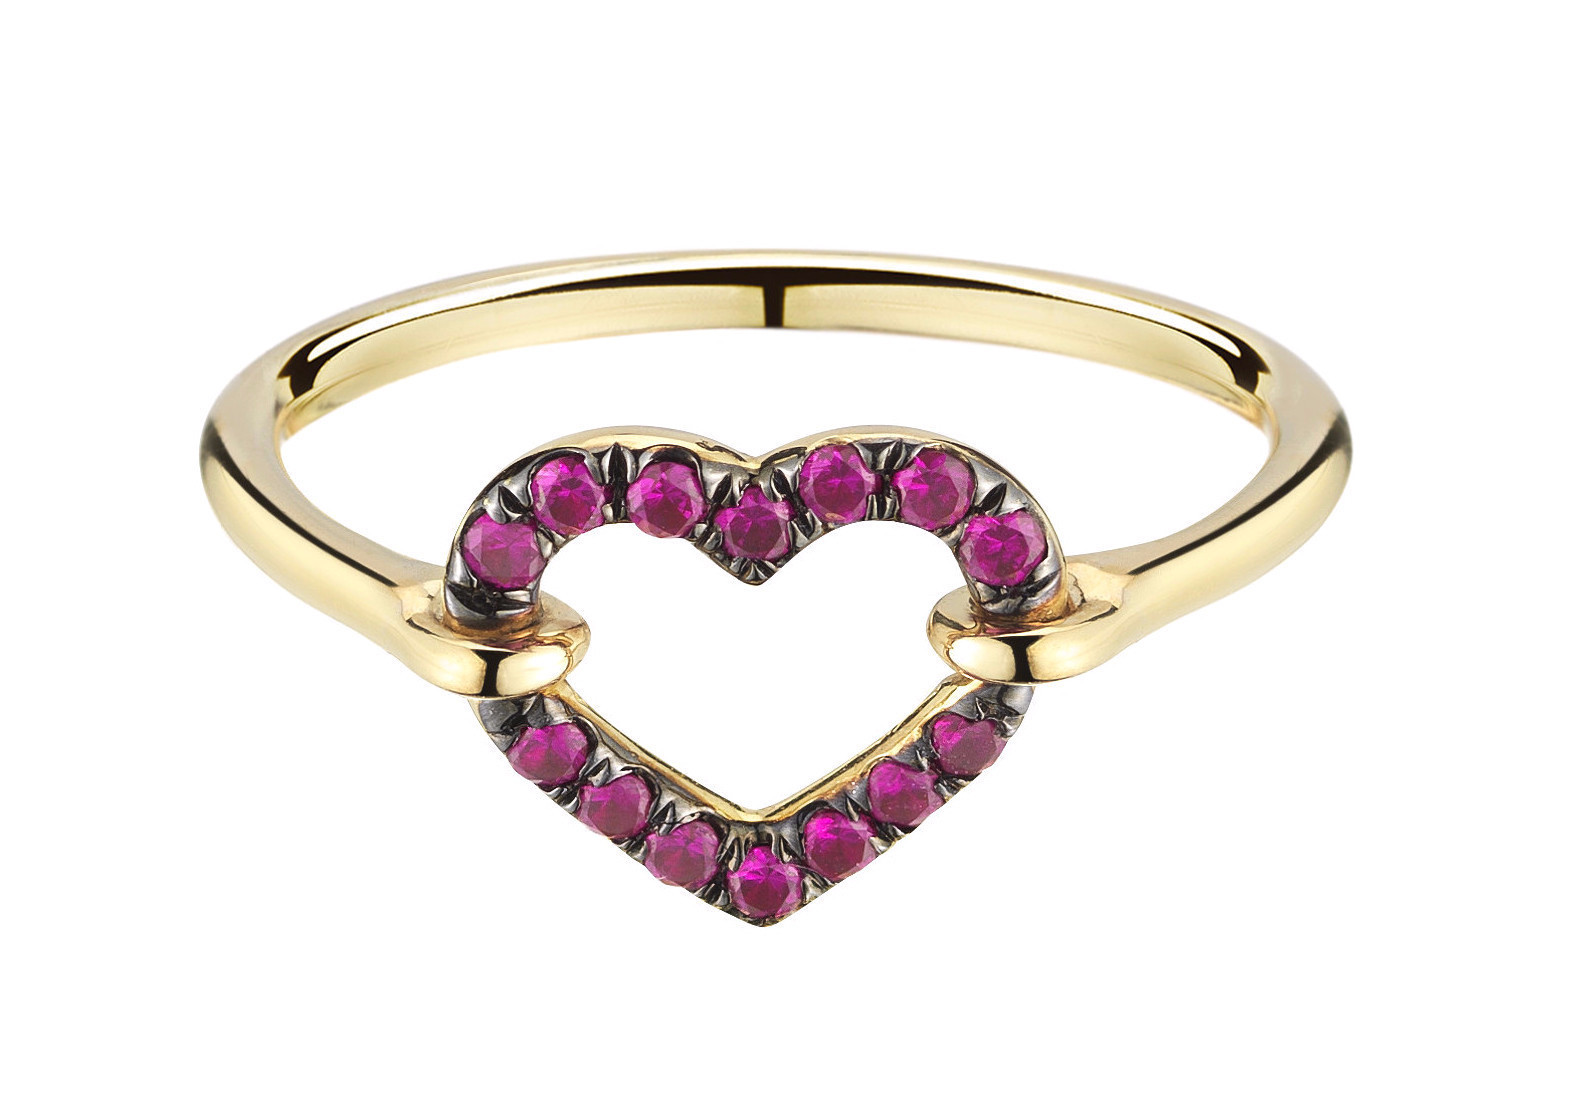  Ruby Open Heart Ring,&nbsp;$1300,  available at Finn Jewelry .&nbsp; 